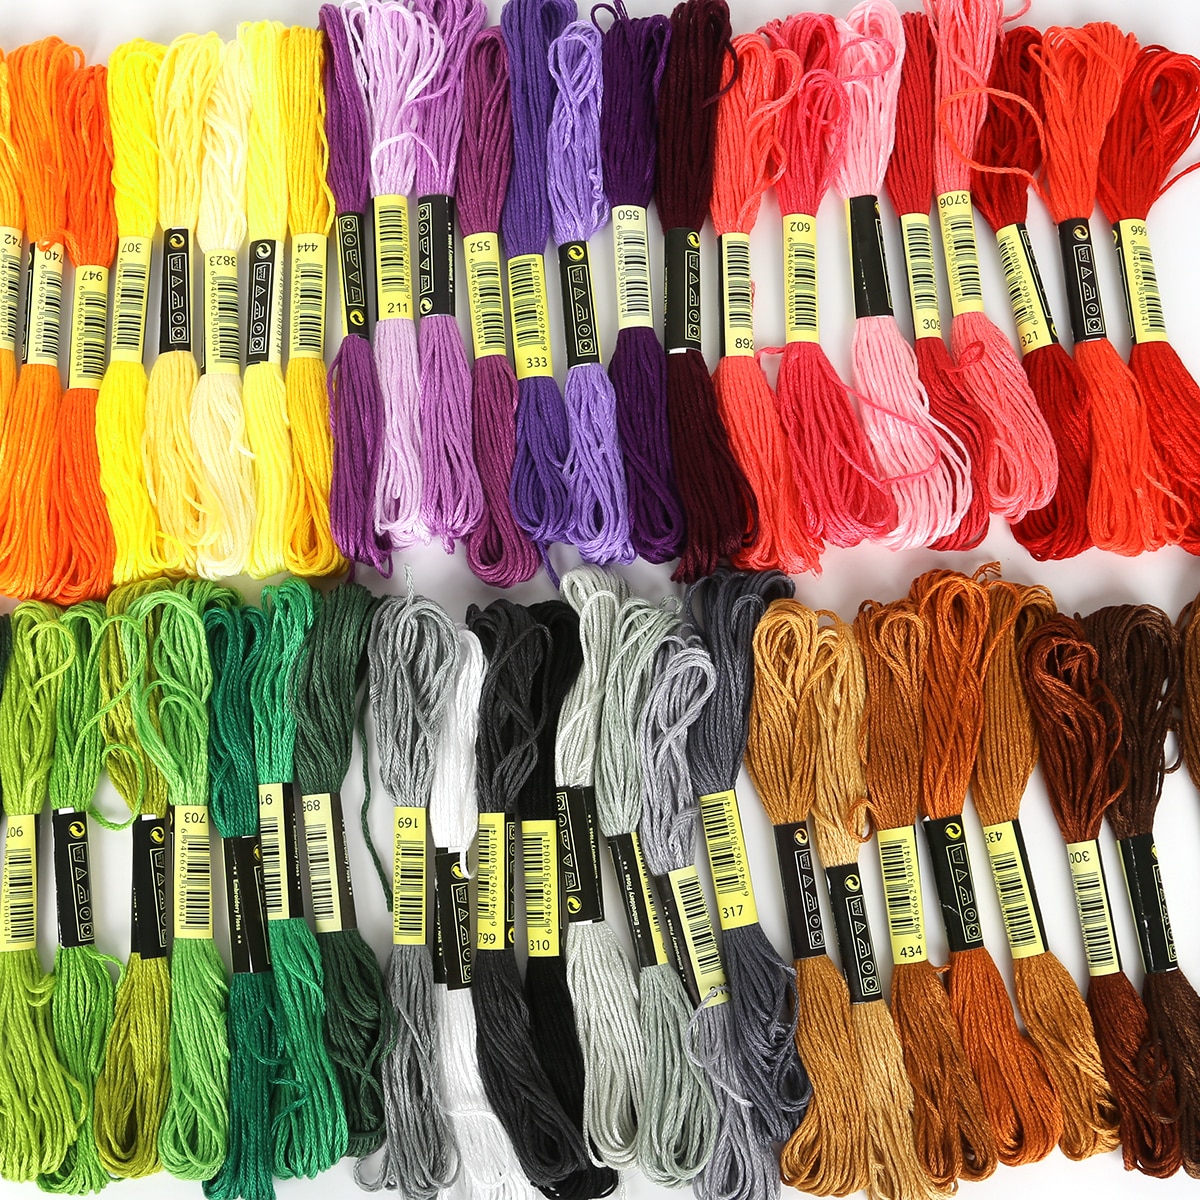 8 pcs/lot Various Colors DMC embroidery floss Cross Stitch Cotton Embroidery Thread Floss Sewing Skeins Craft